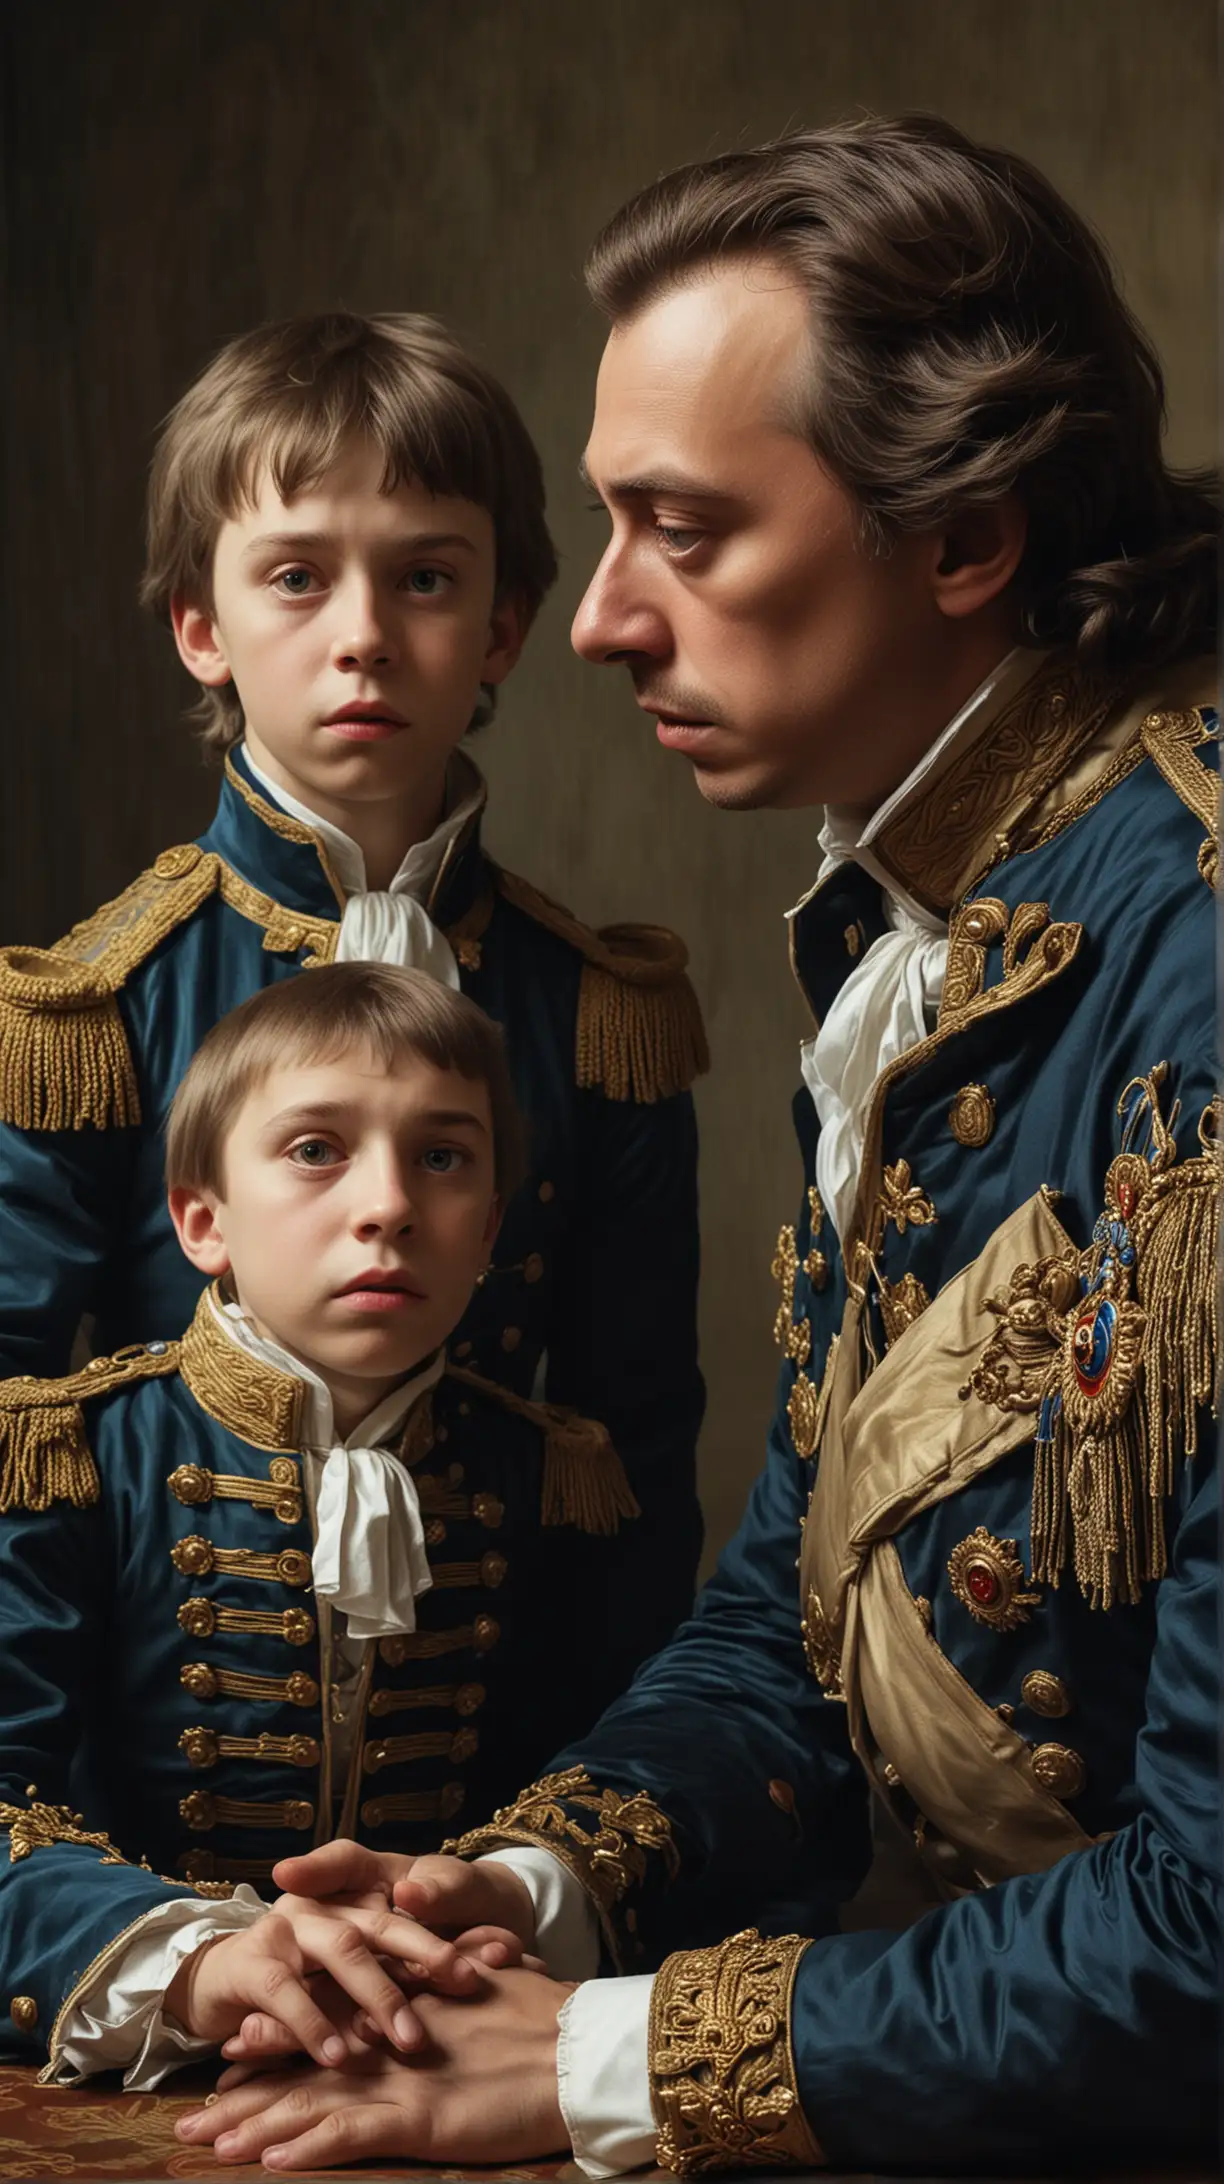  Illustrate a tense father-son moment between Peter the Great and his son Alexei, capturing their strained relationship and conflicting ideologies.